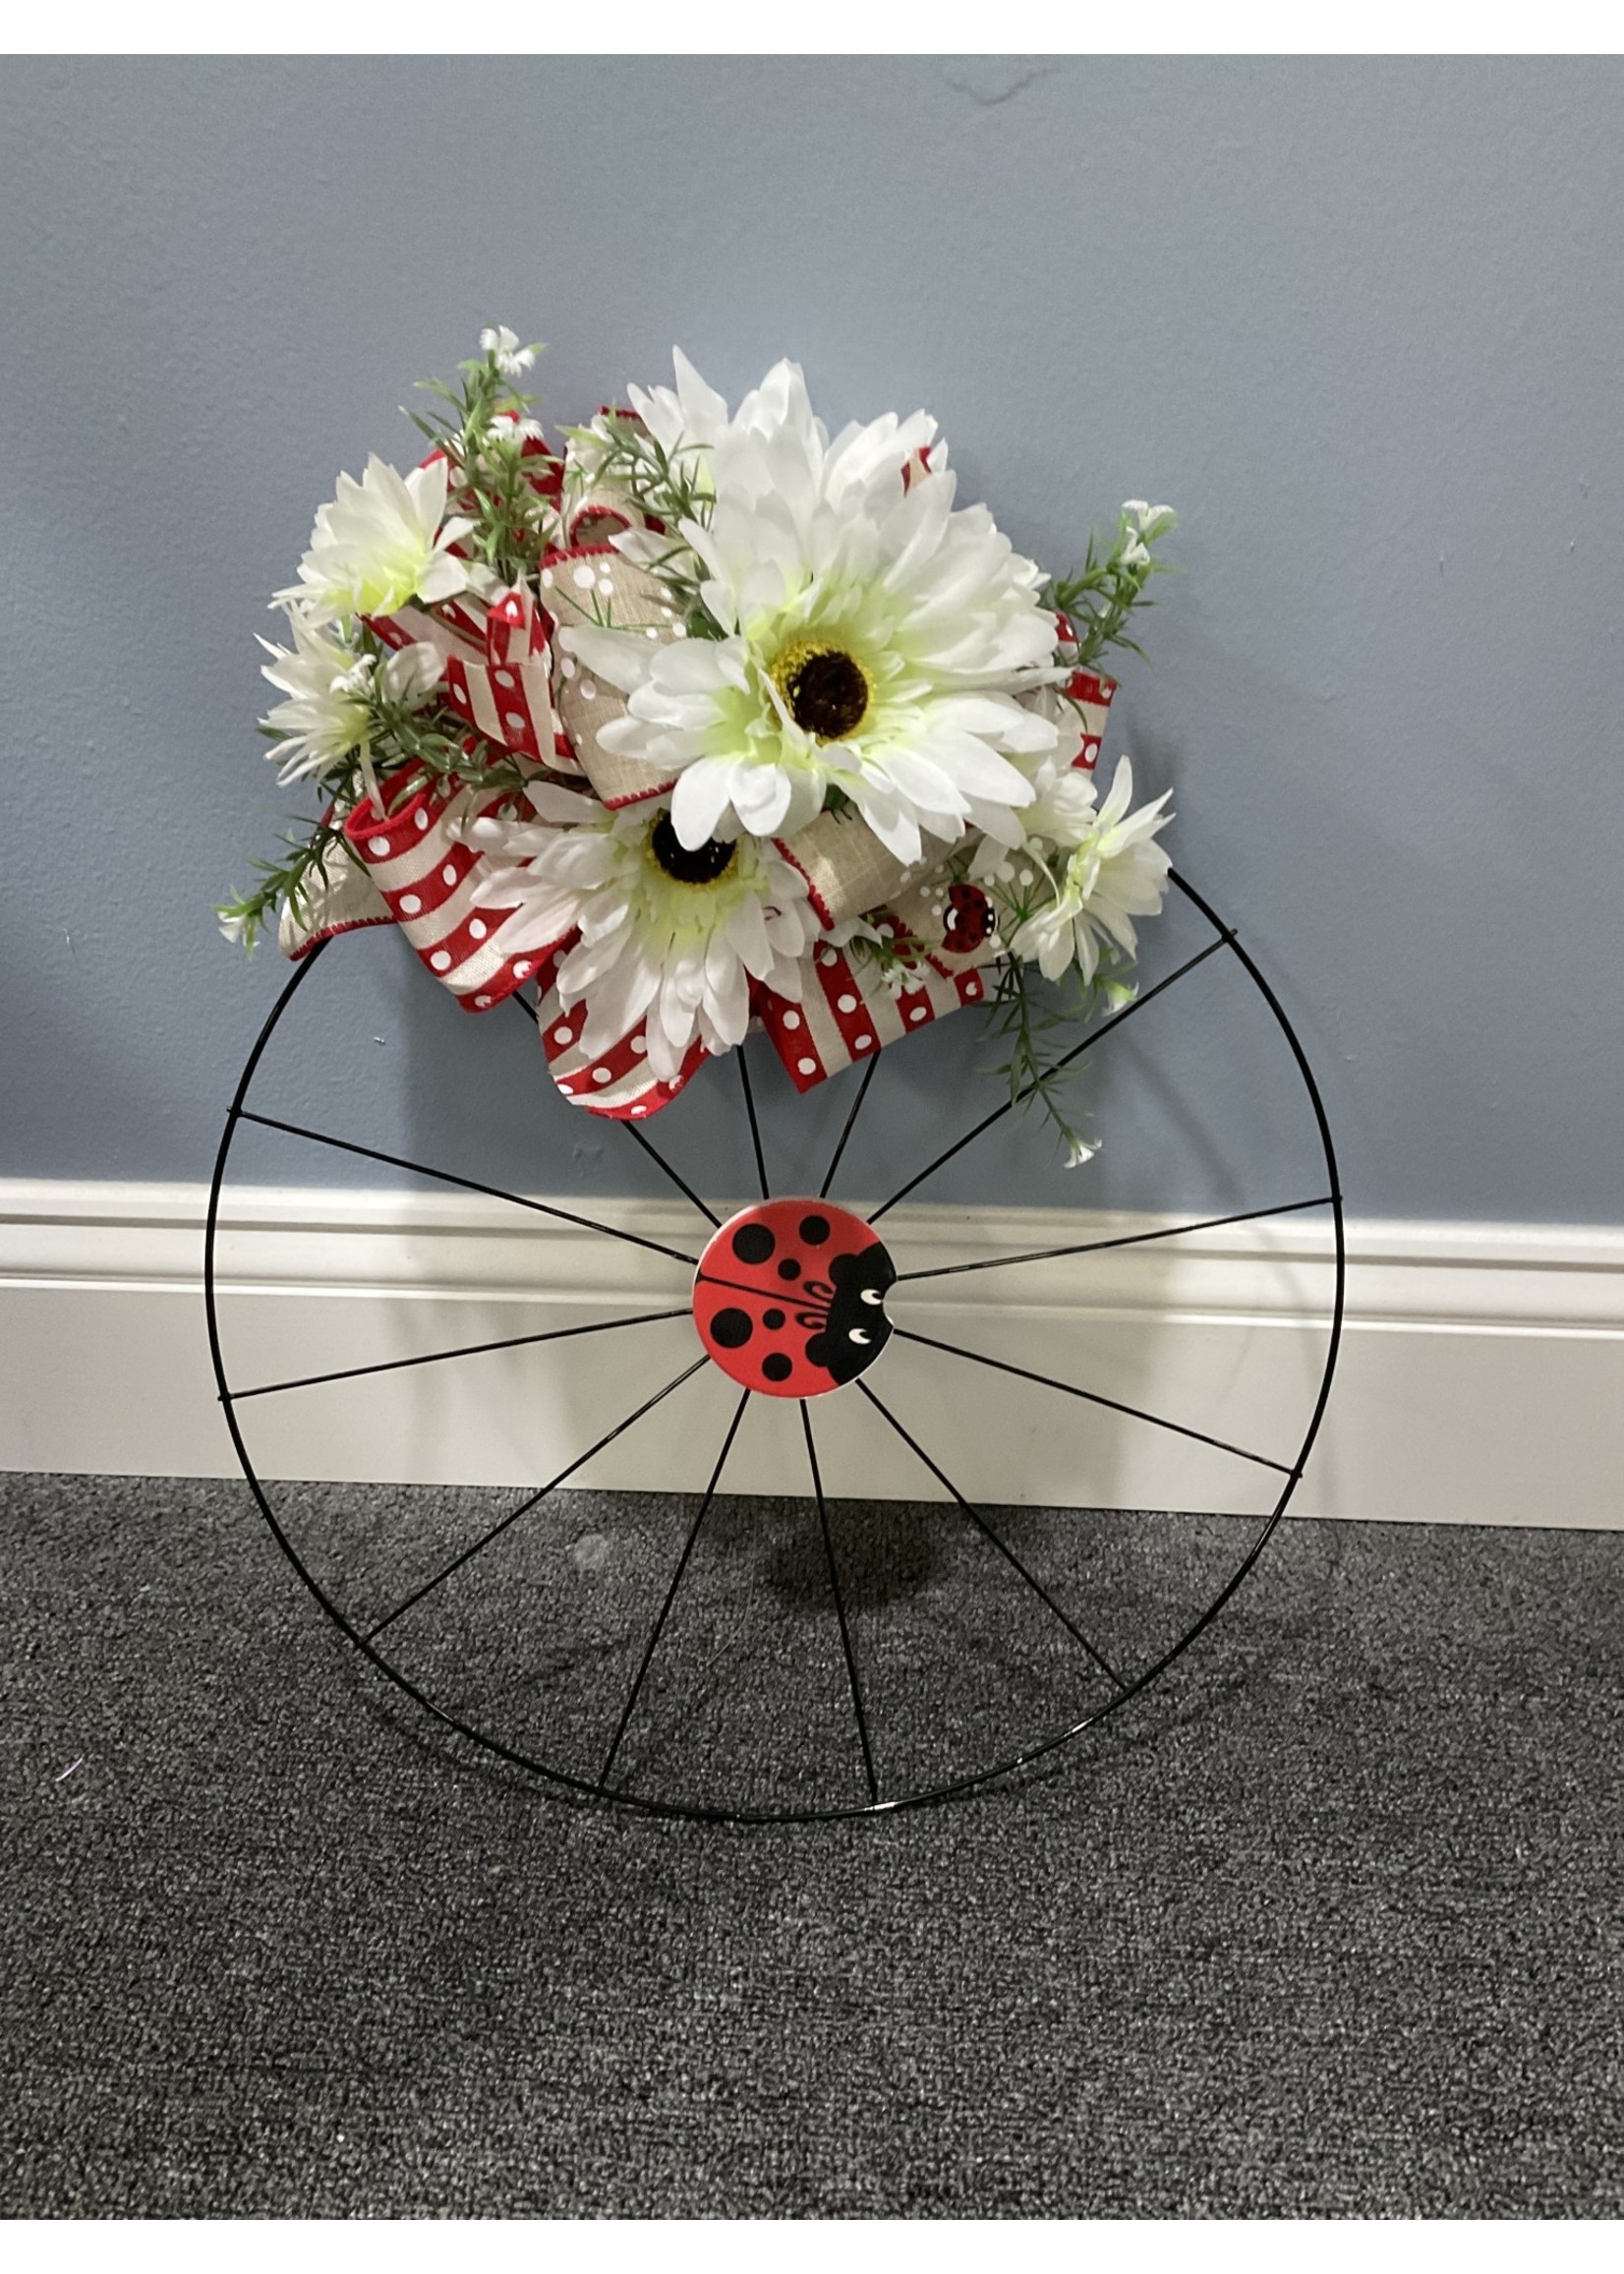 My New Favorite Thing Wreath Bicycle 18 in-Black Ladybug w/White Daisies and Red Polka Dot Ribbon